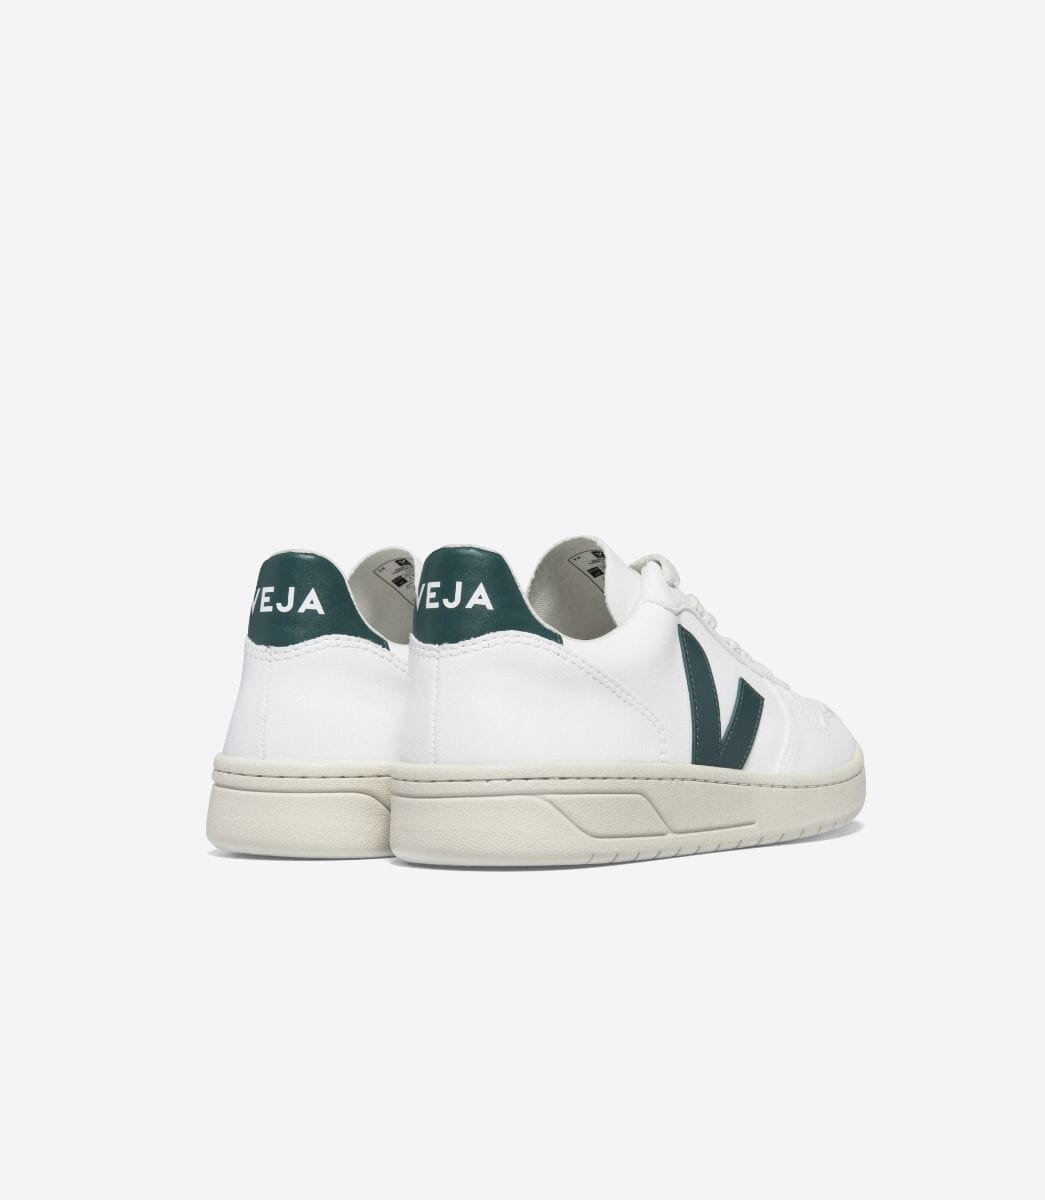 Veja M's V-10 CWL - Cotton Worked as Leather White Brittany 1 Shoes